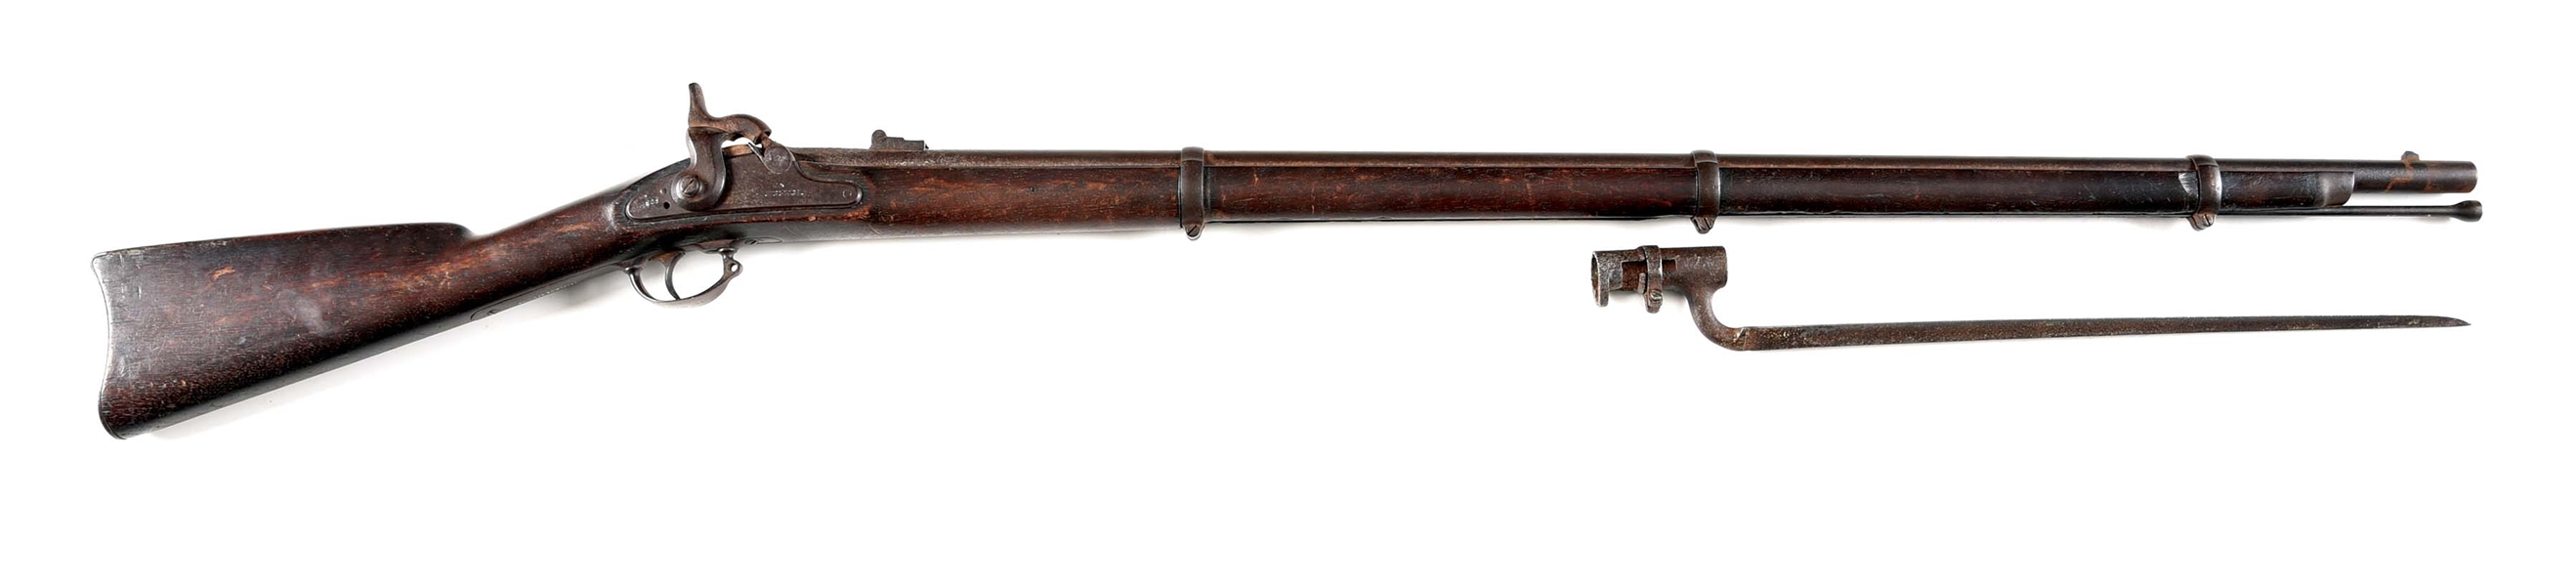 (A) IDENTIFIED CIVIL WAR SPRINGFIELD MODEL 1863 PERCUSSION RIFLED MUSKET.